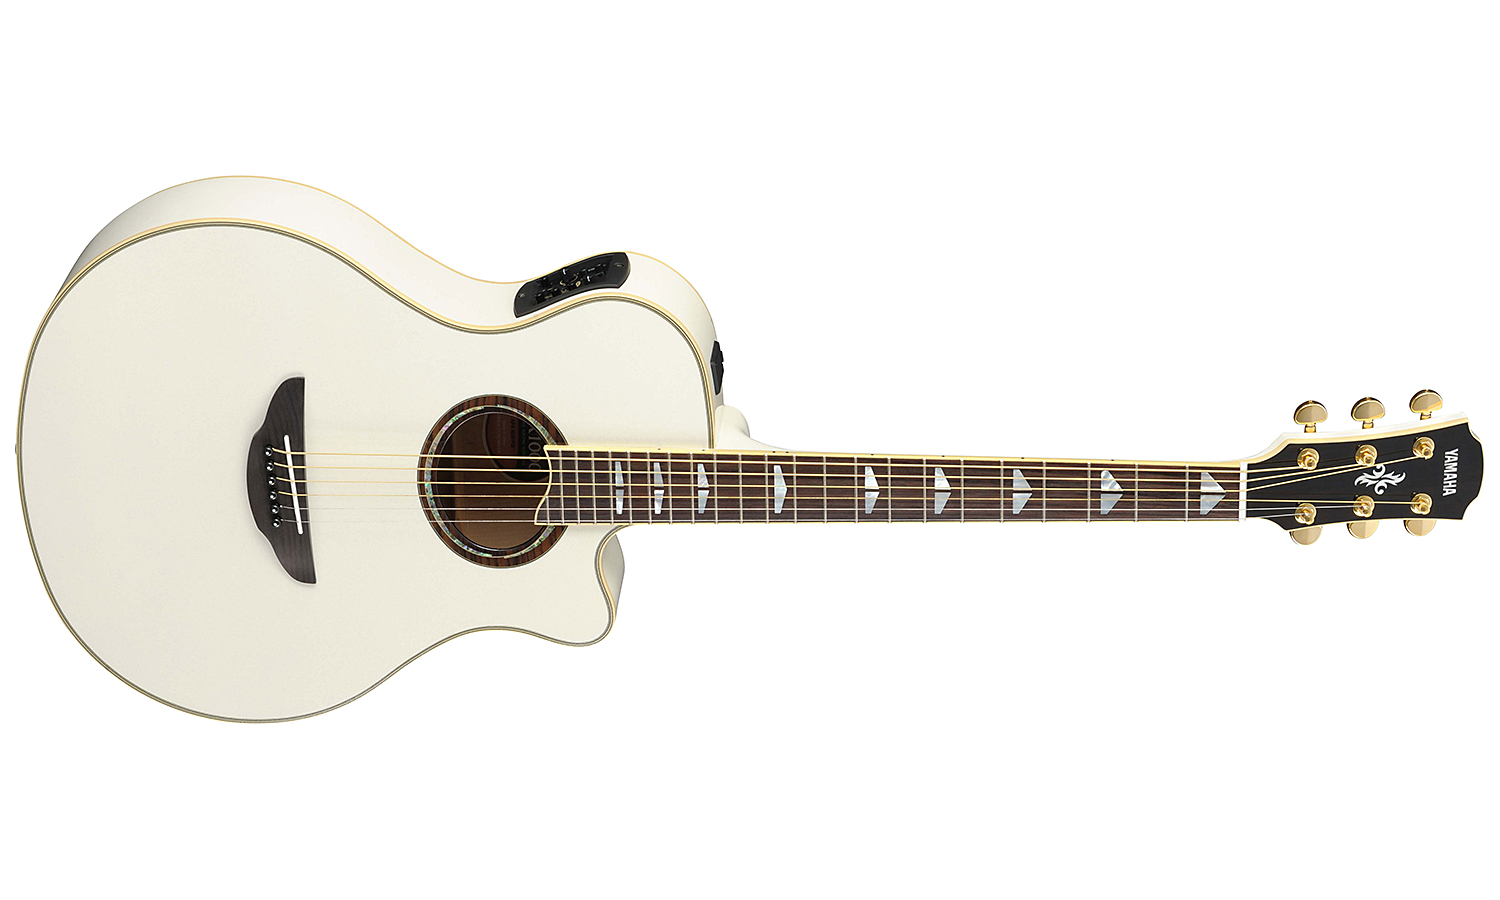 Yamaha Apx1000 Pearl White - Pearl White - Electro acoustic guitar - Variation 1